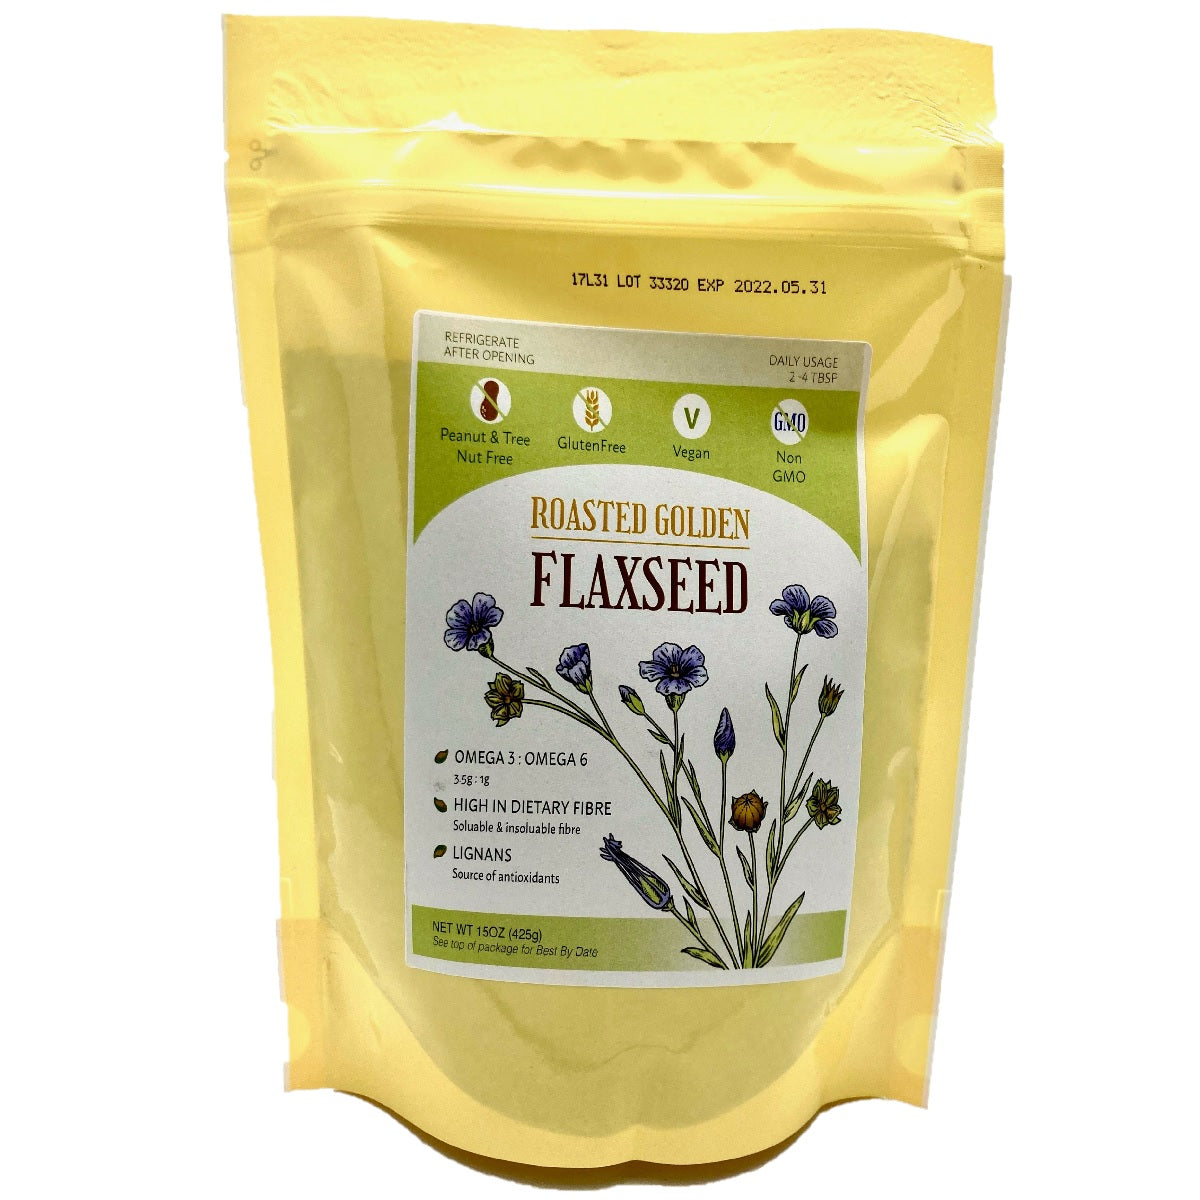 Belmont Roasted Golden Flaxseed 425g